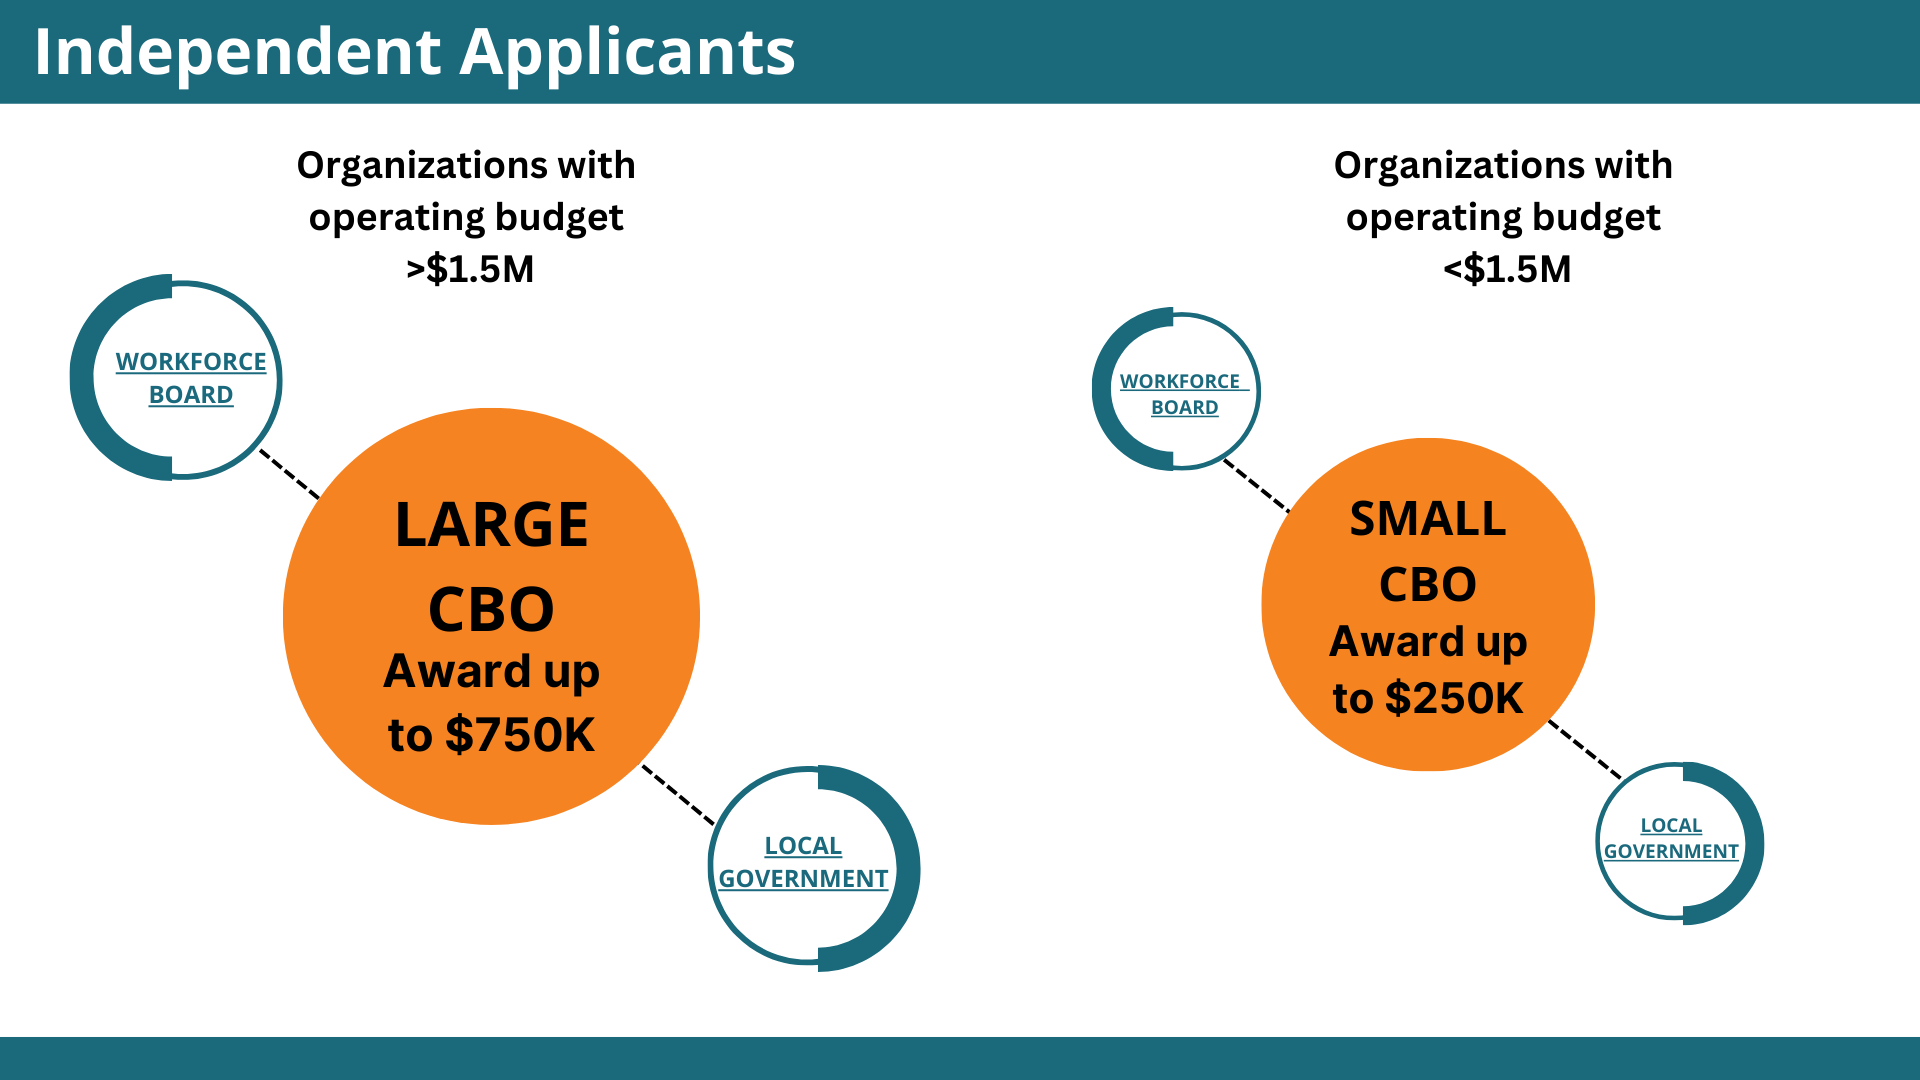 Award amounts for large and small Independent applicants